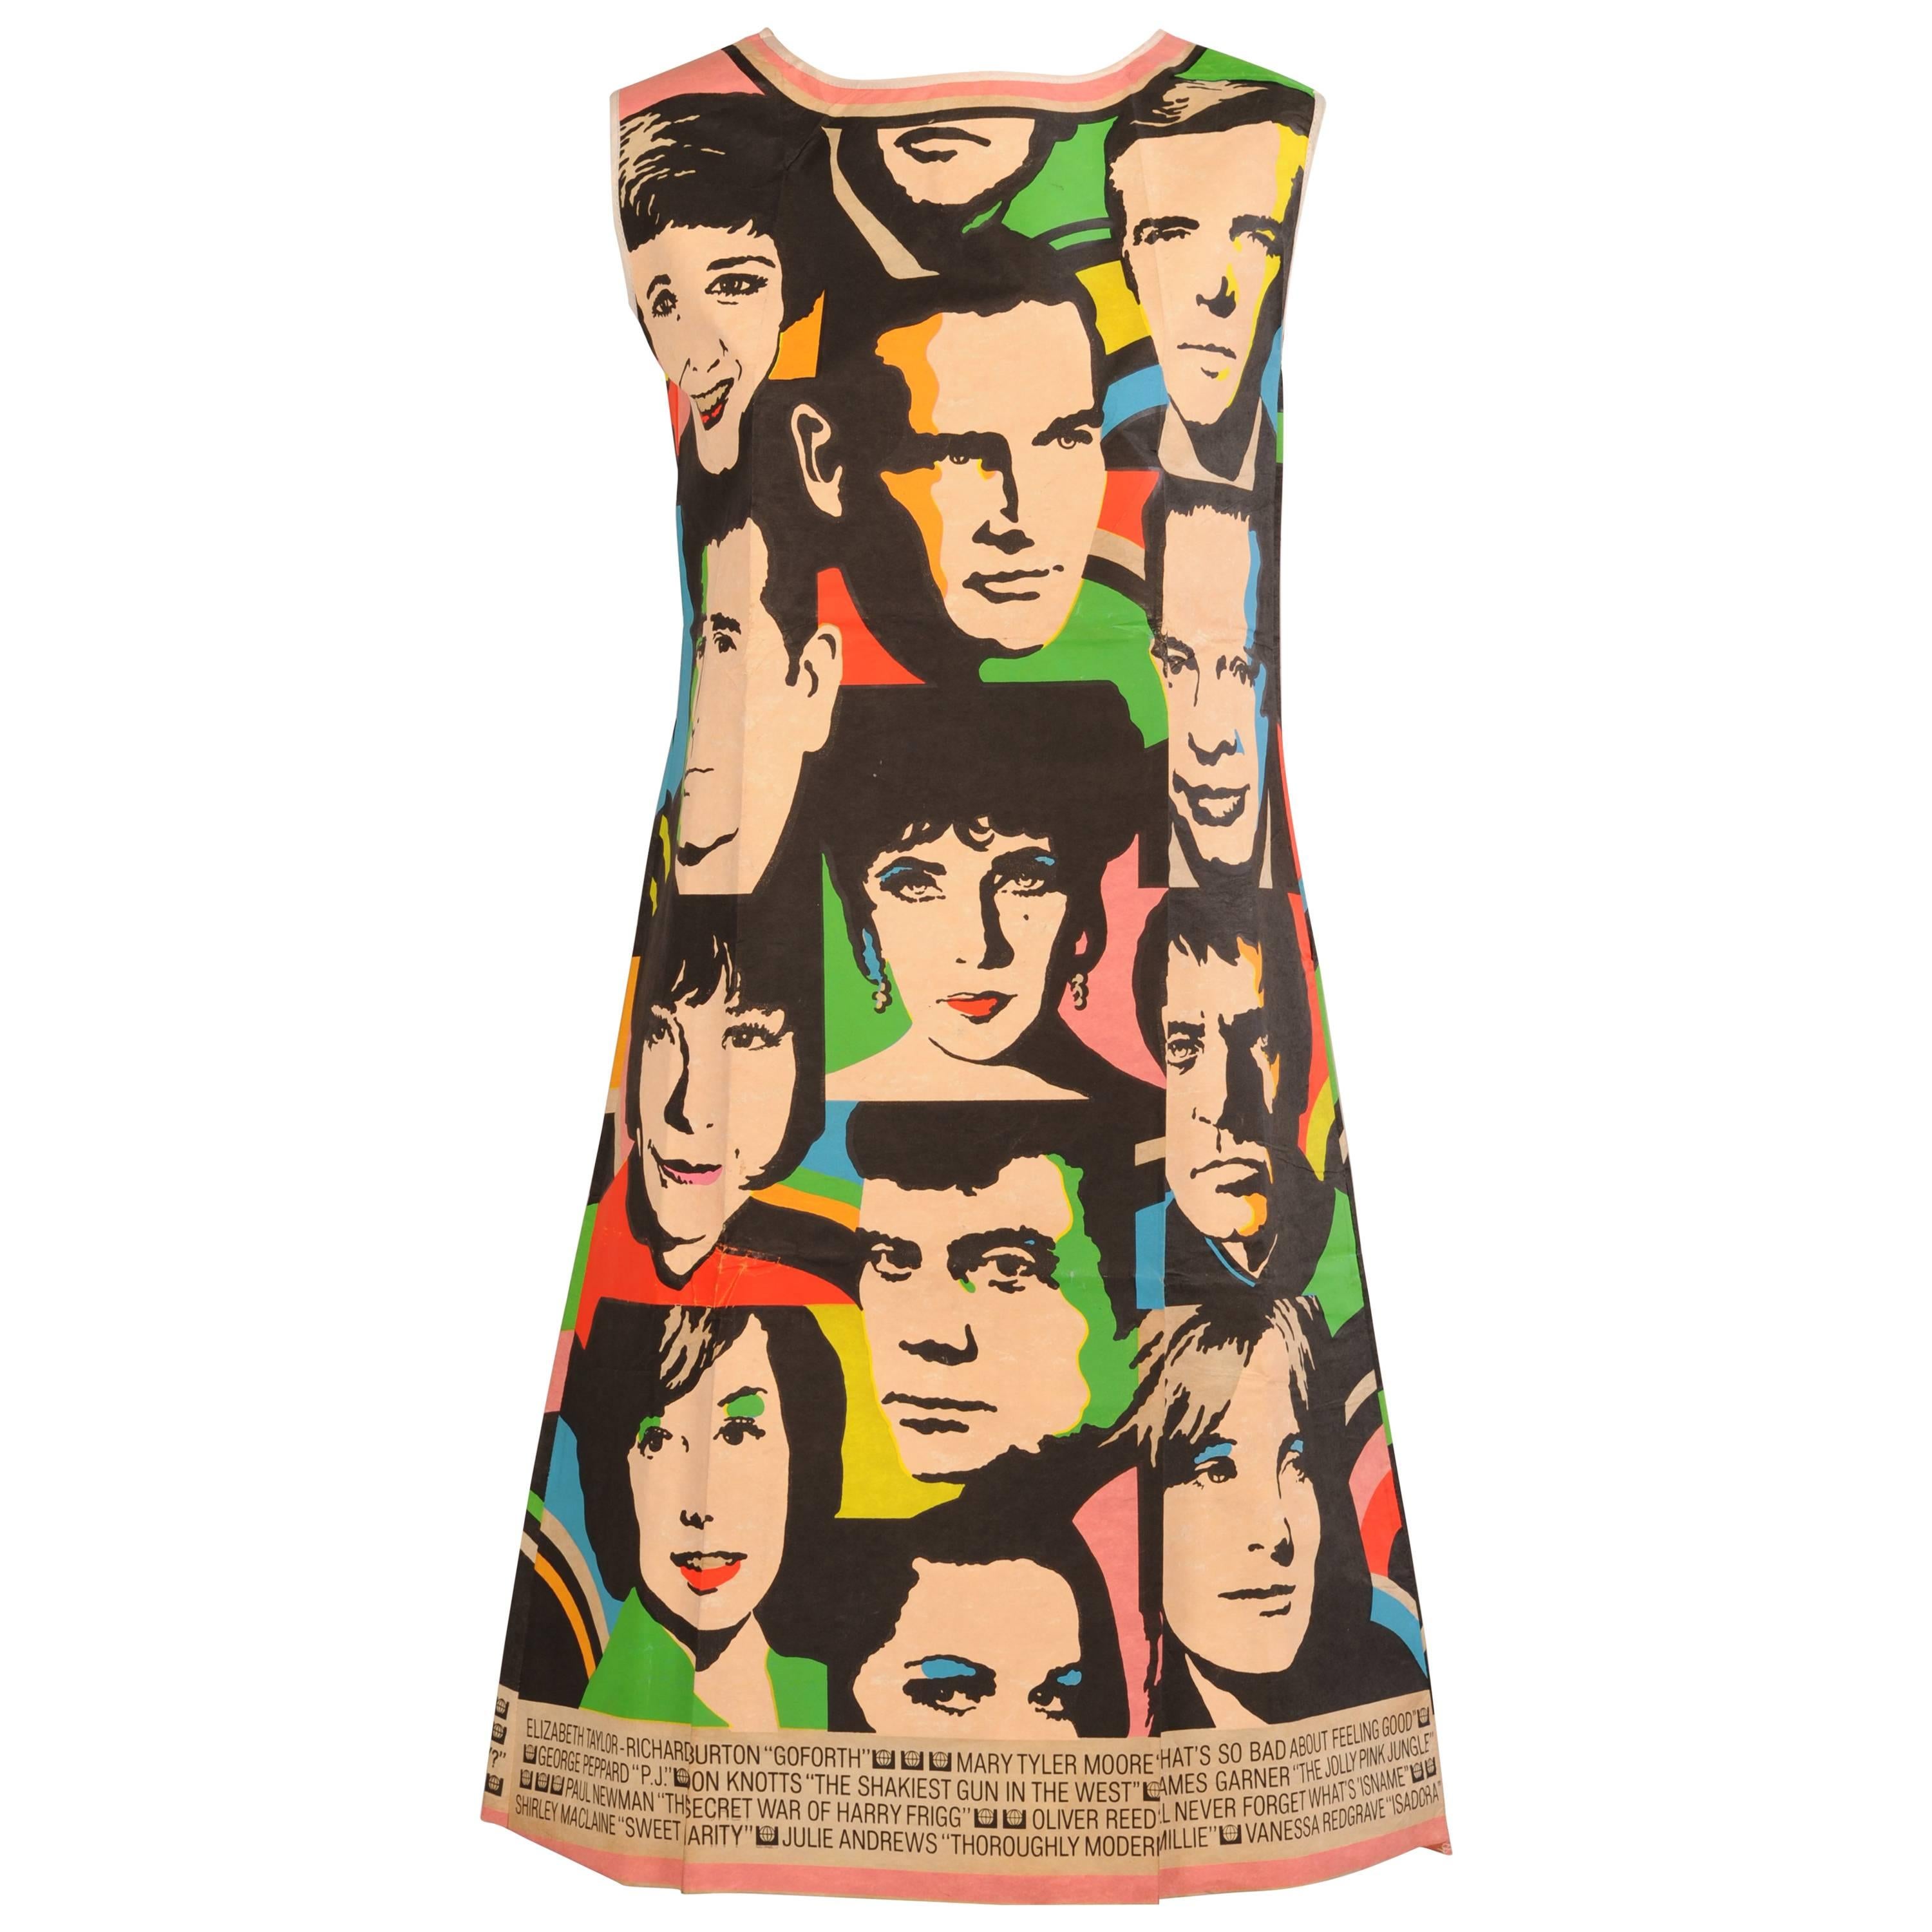 Universal Studios Paper Dress "The Big Ones for '68" style of Andy Warhol